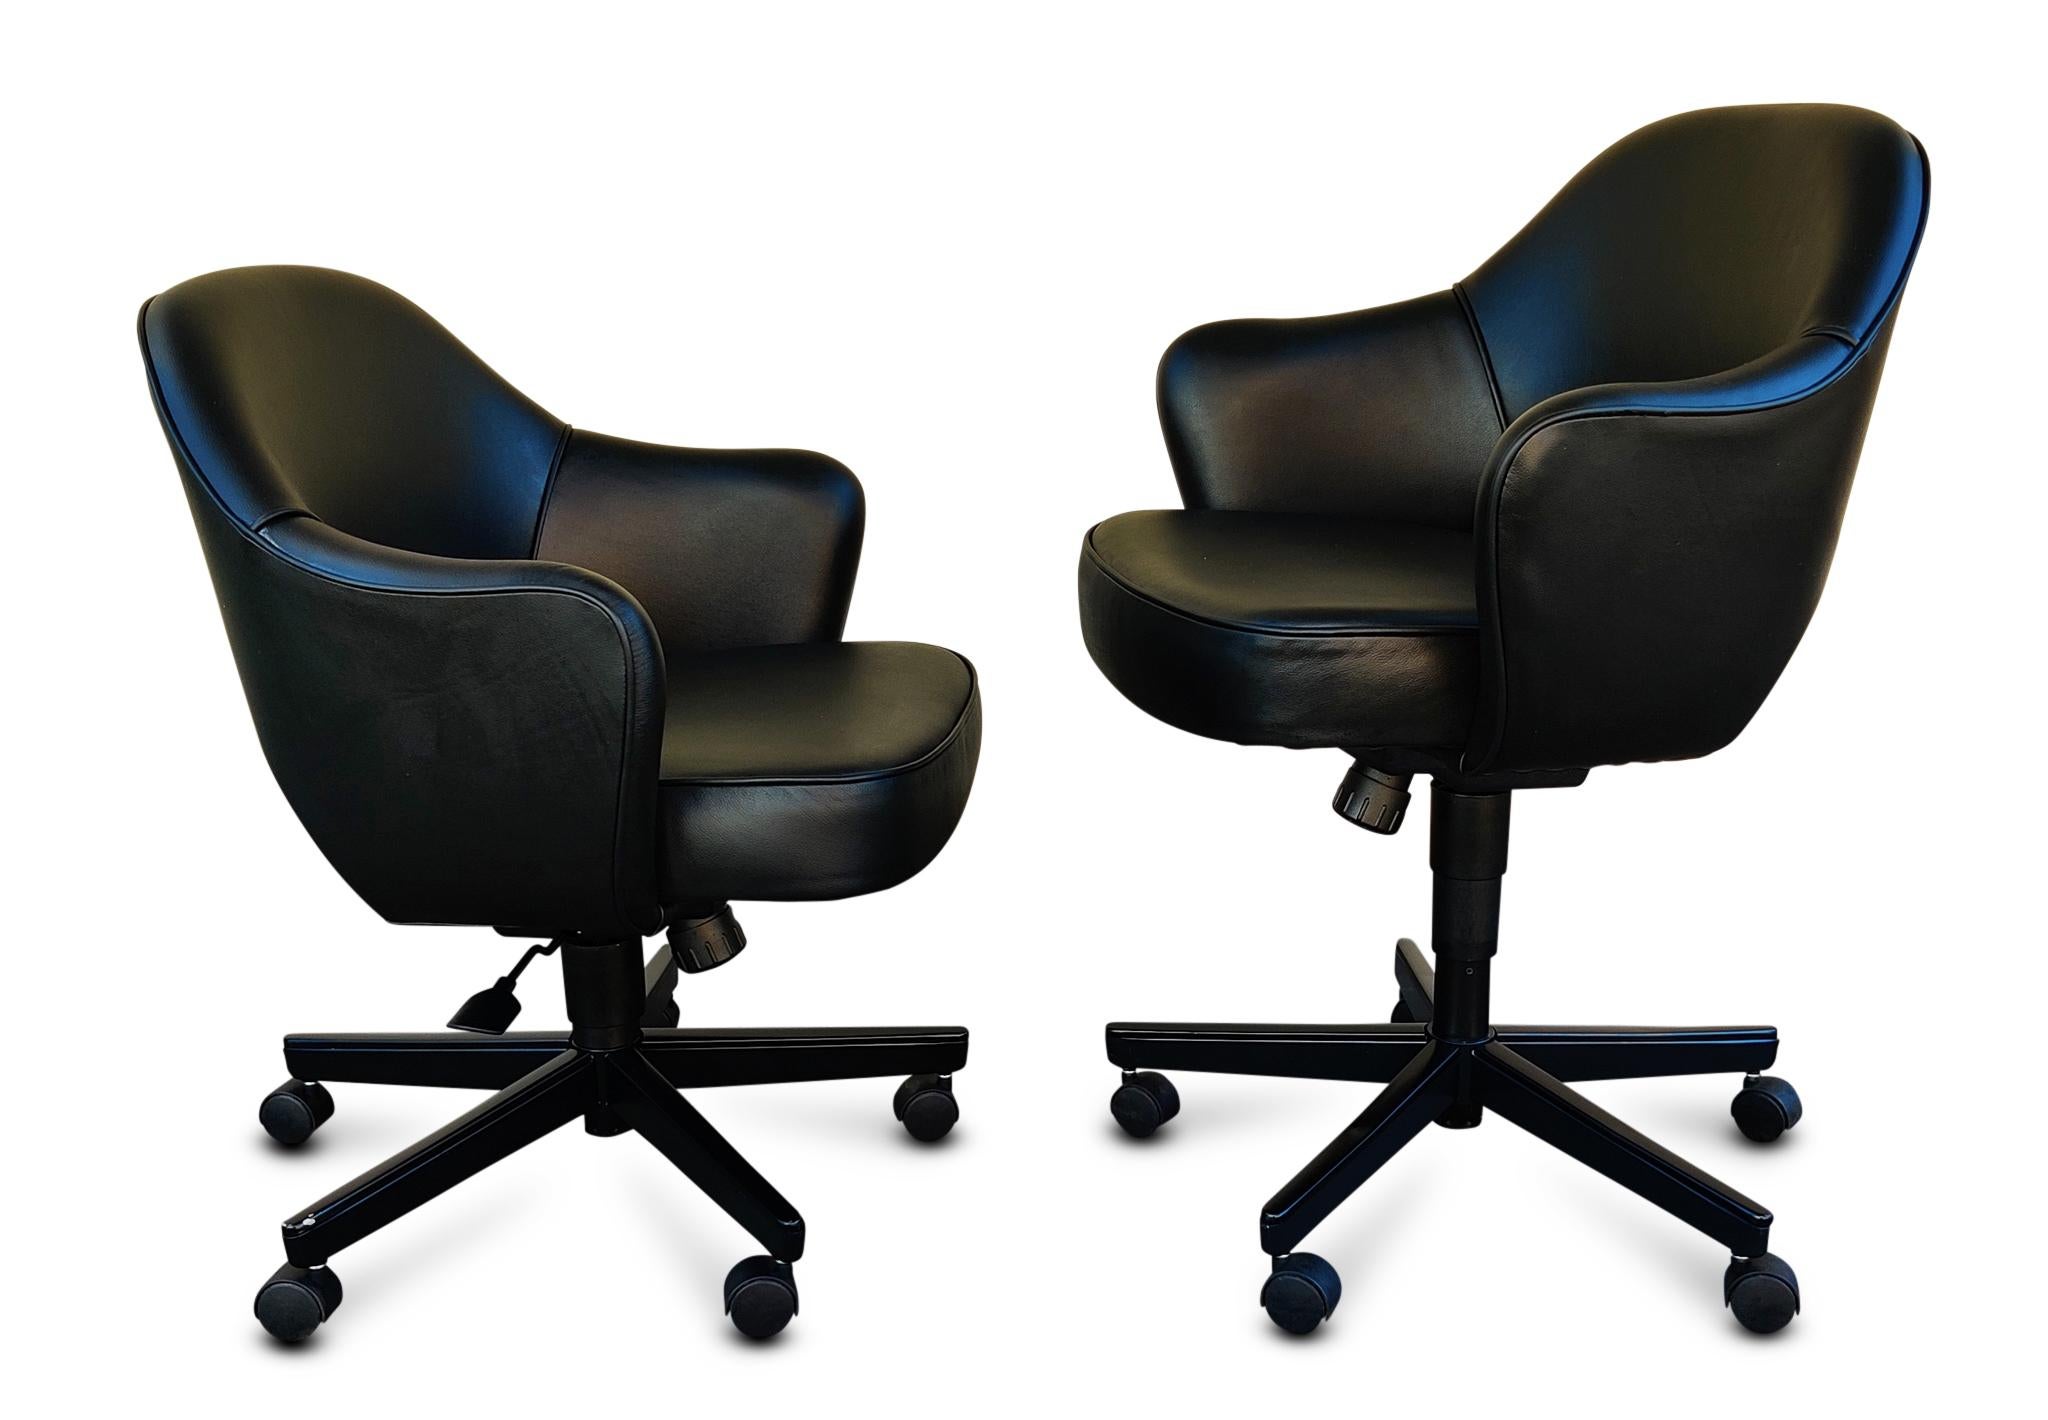 Pair Saarinen Knoll Executive Chairs Black Leather Tilt Swivel Height Adjustable In Good Condition For Sale In Philadelphia, PA